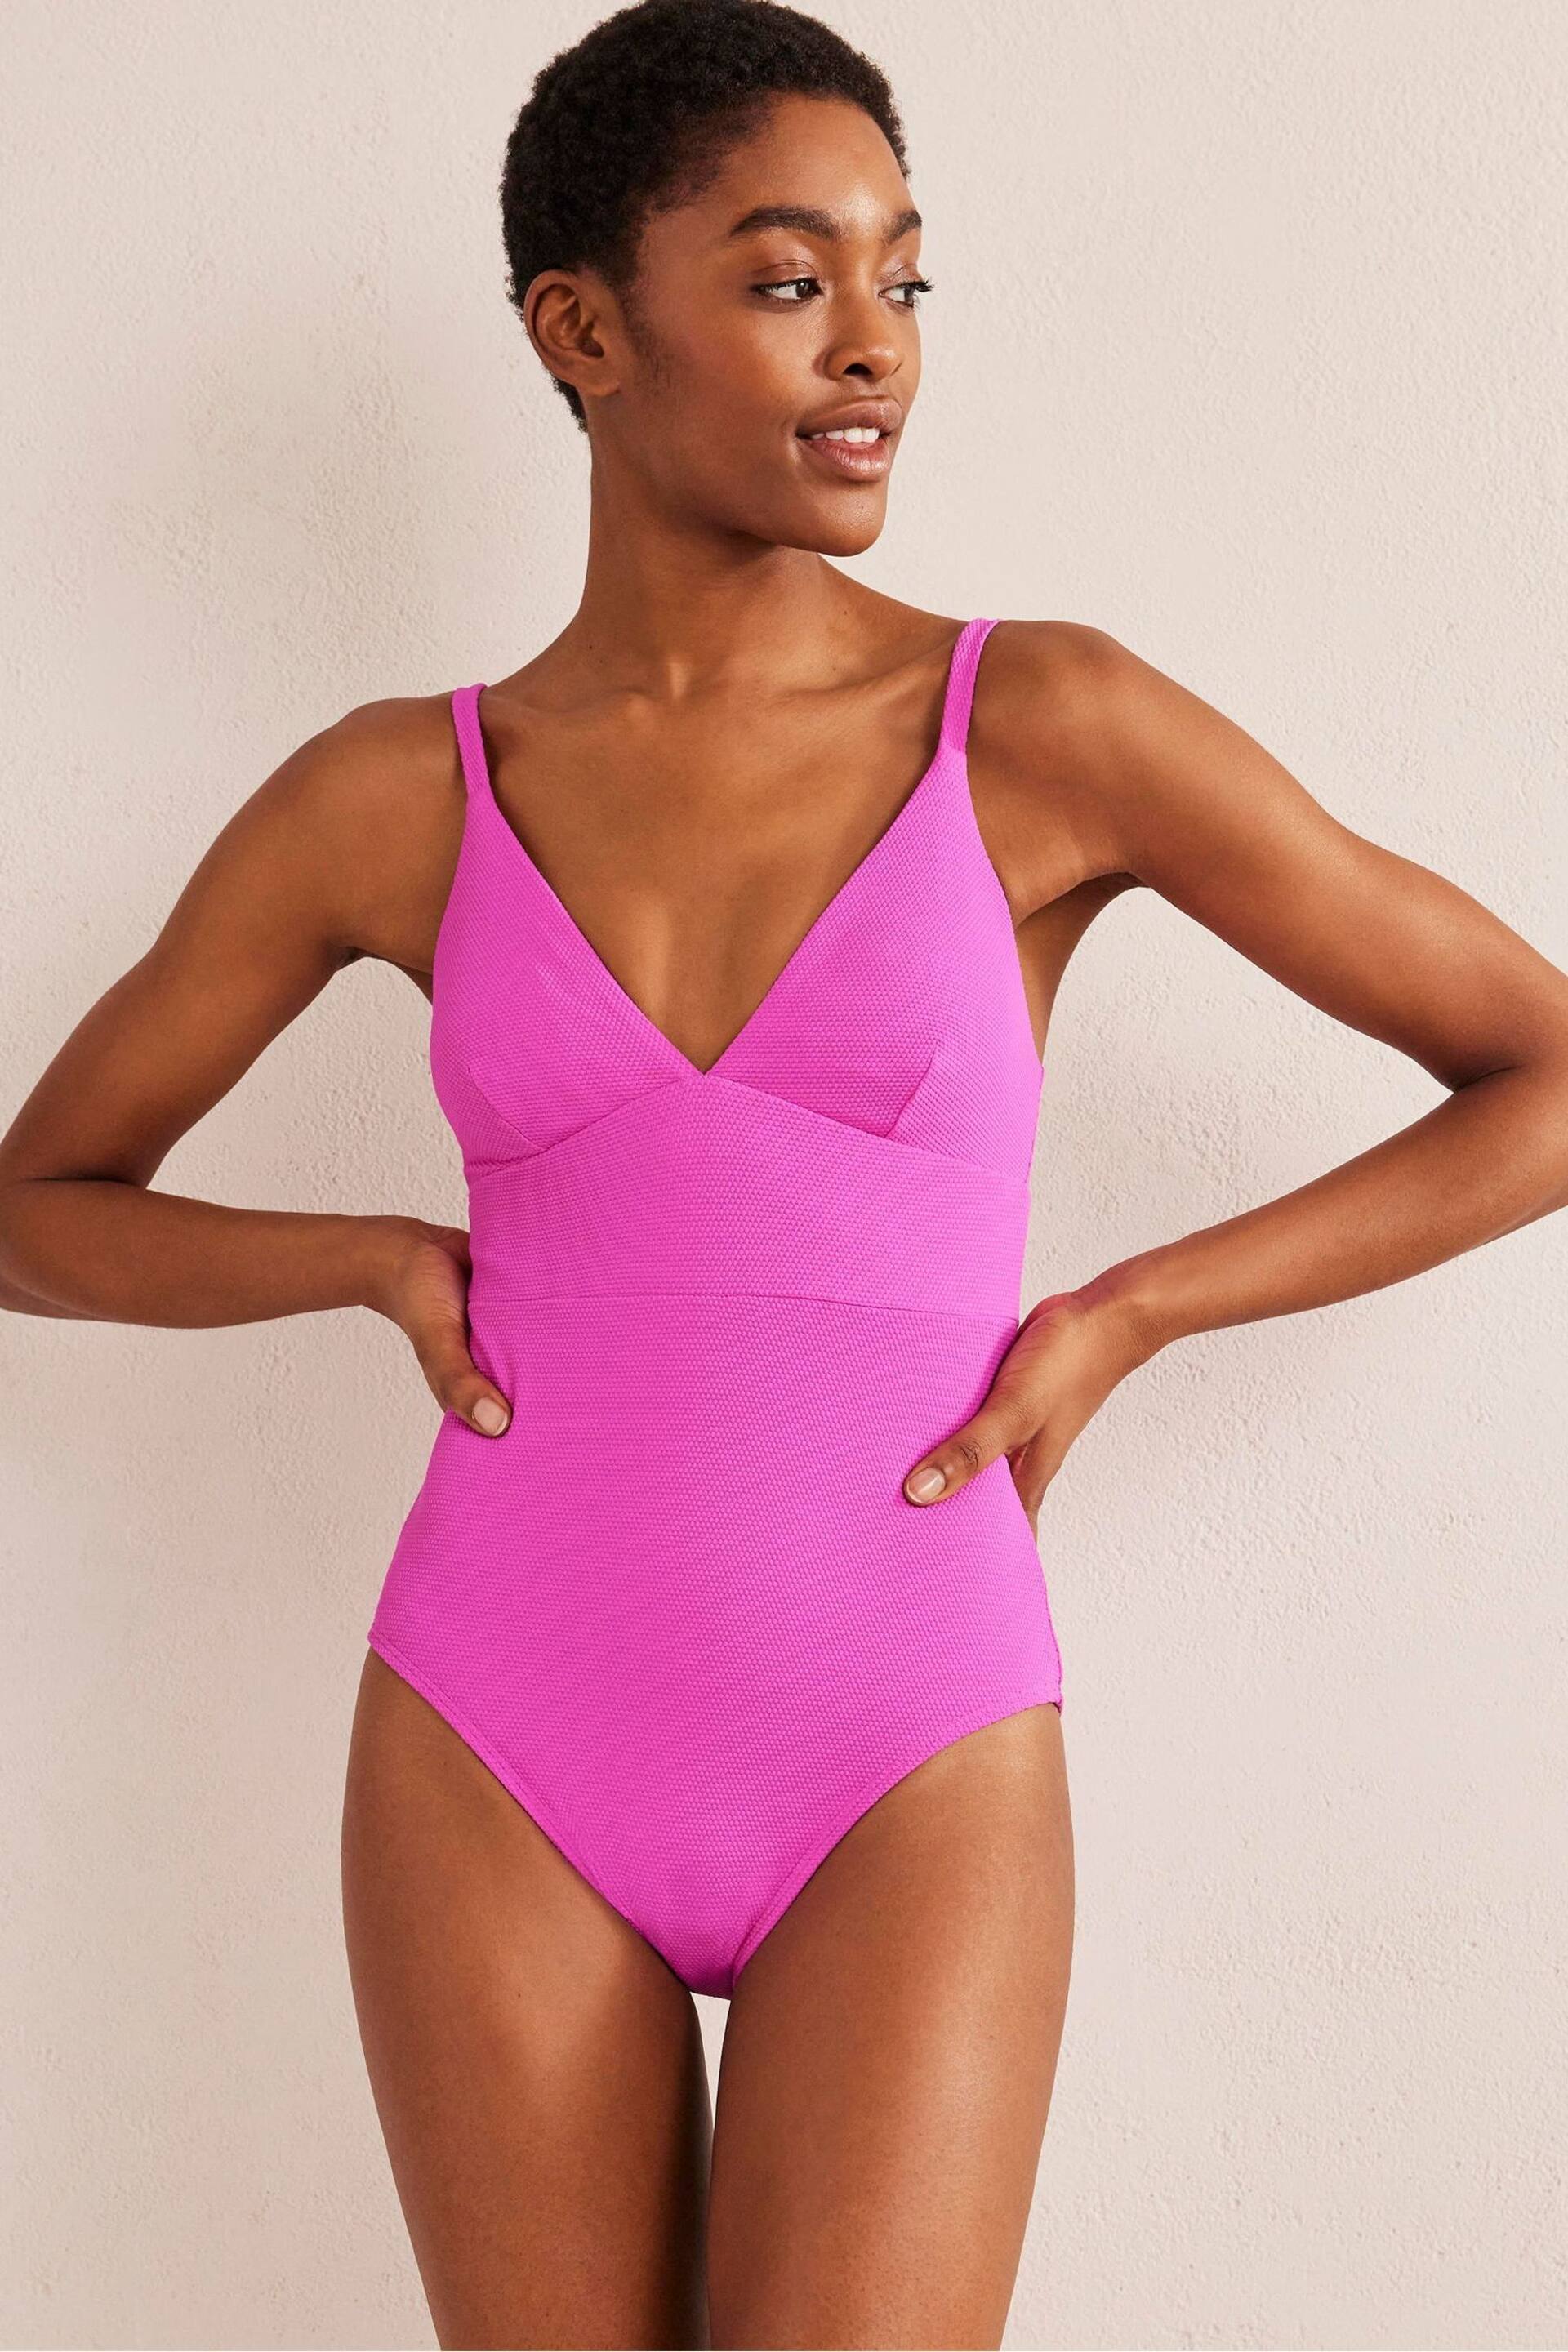 Boden Pink Arezzo V-Neck Panel Swimsuit - Image 2 of 7